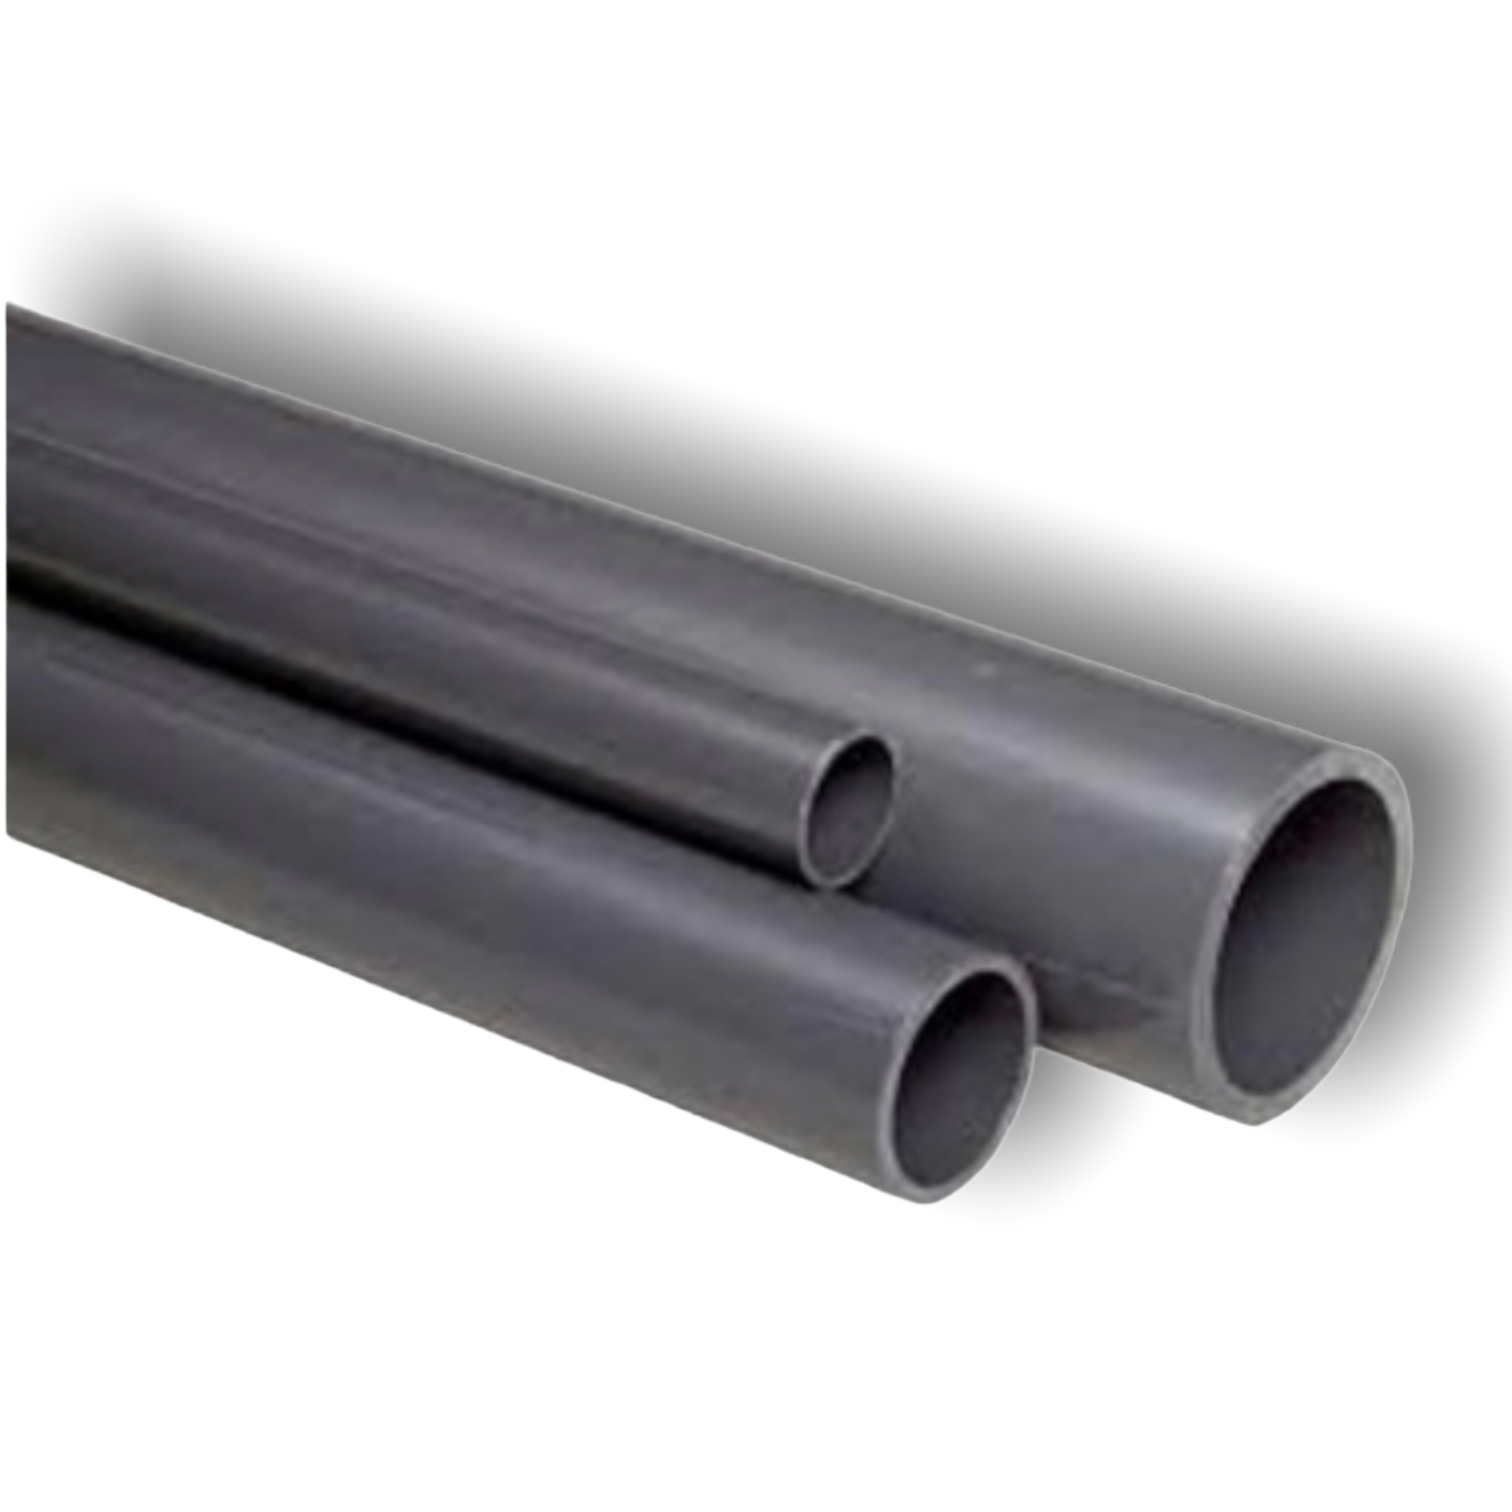 20mm PVC Pipe (Solvent Weld)